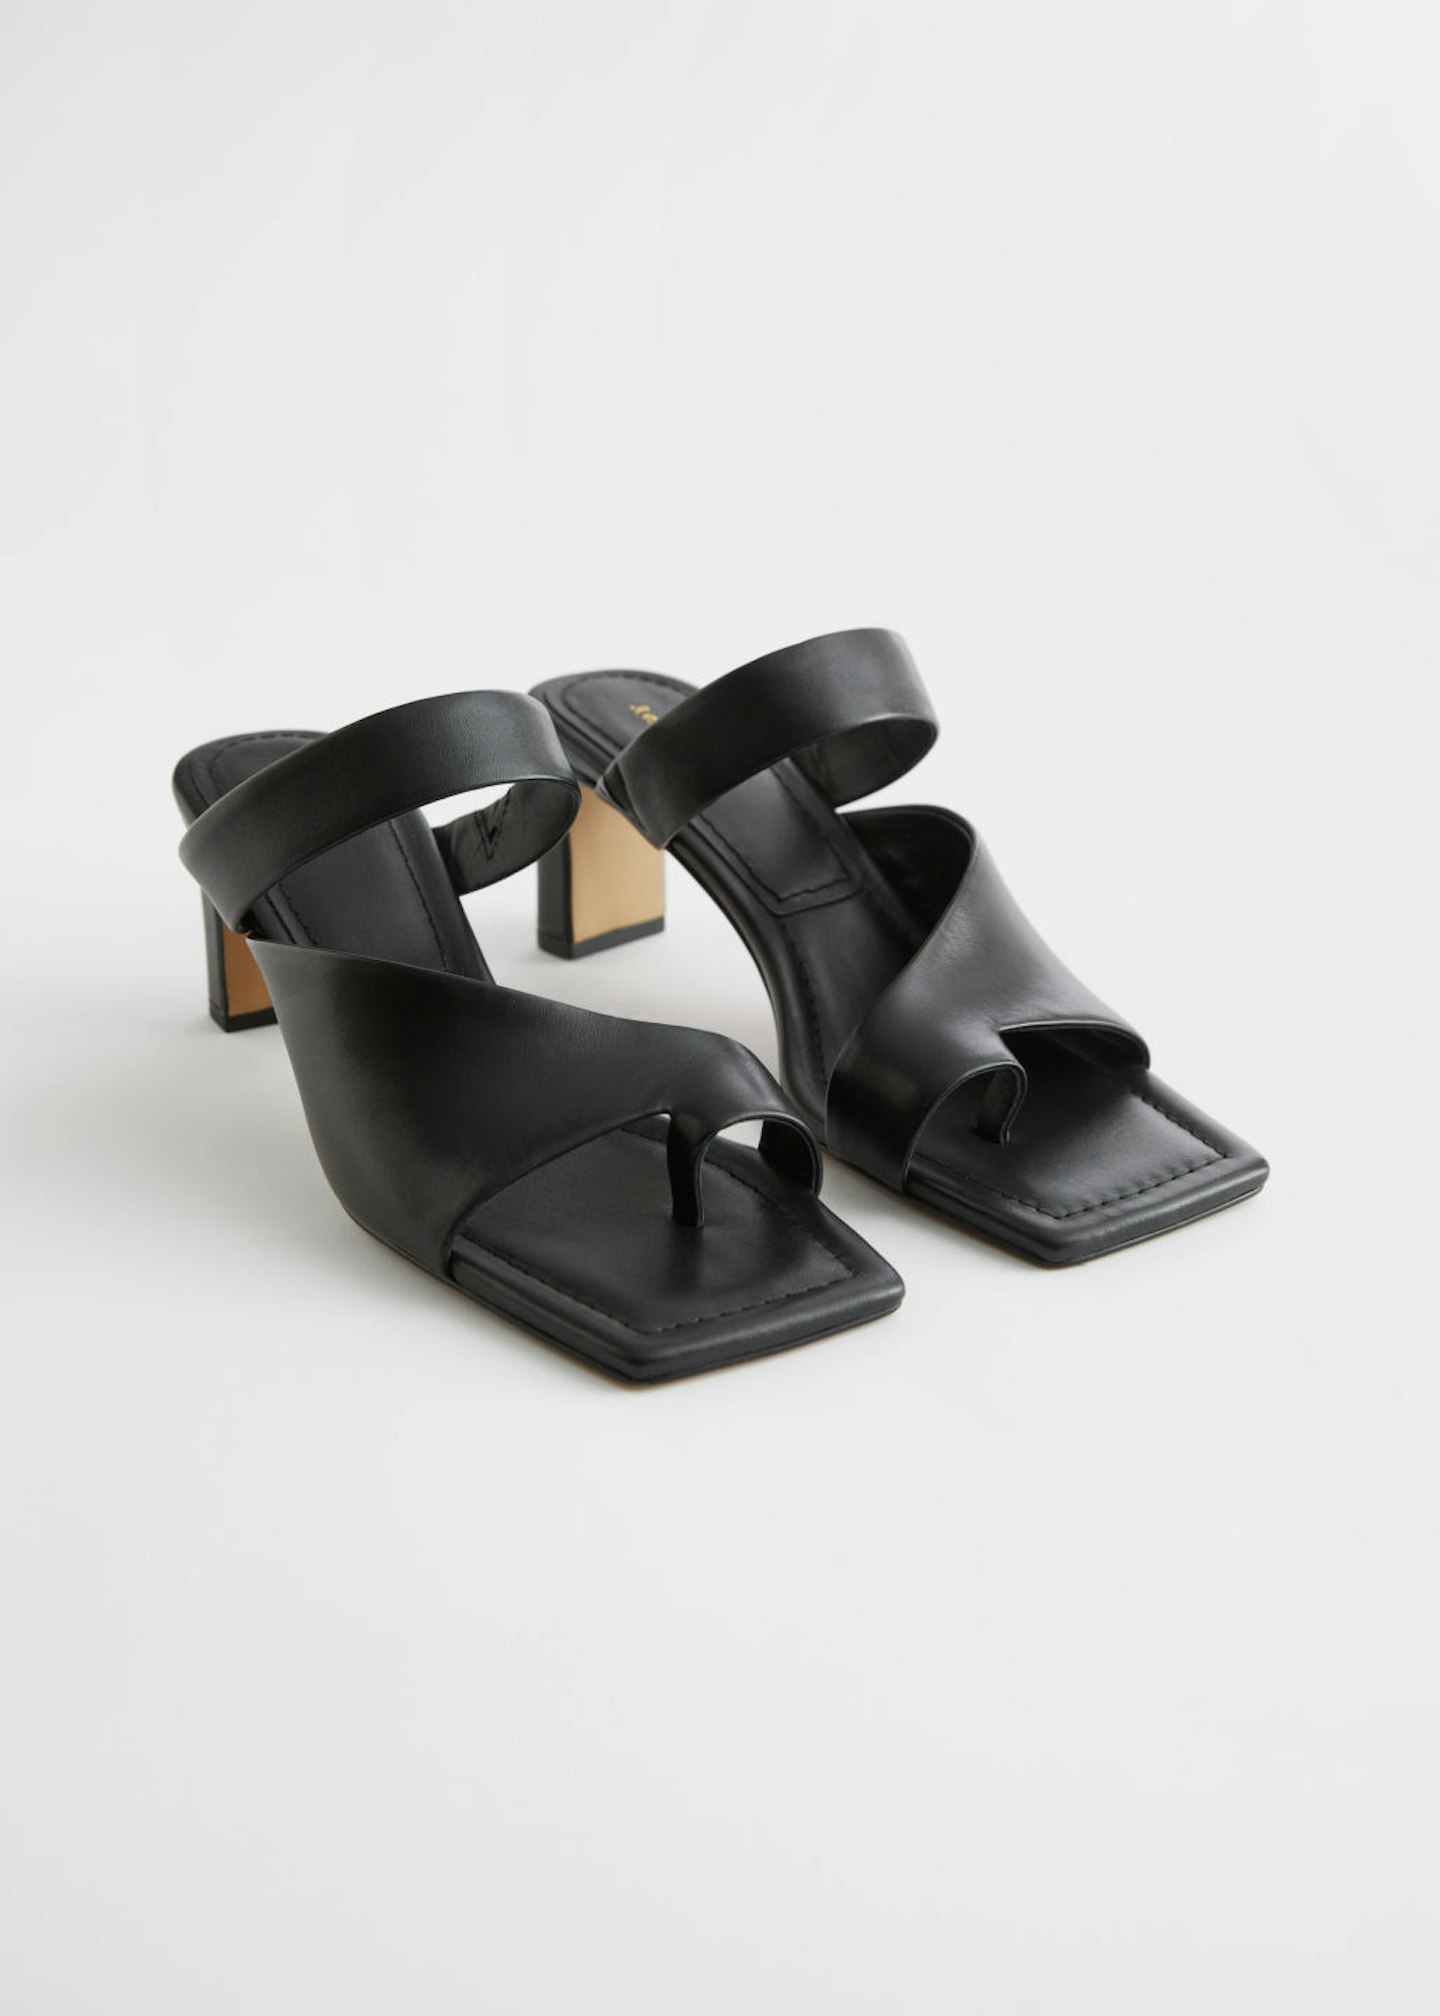 & Other Stories, Square Toe Heeled Sandals, WERE £85 NOW £43